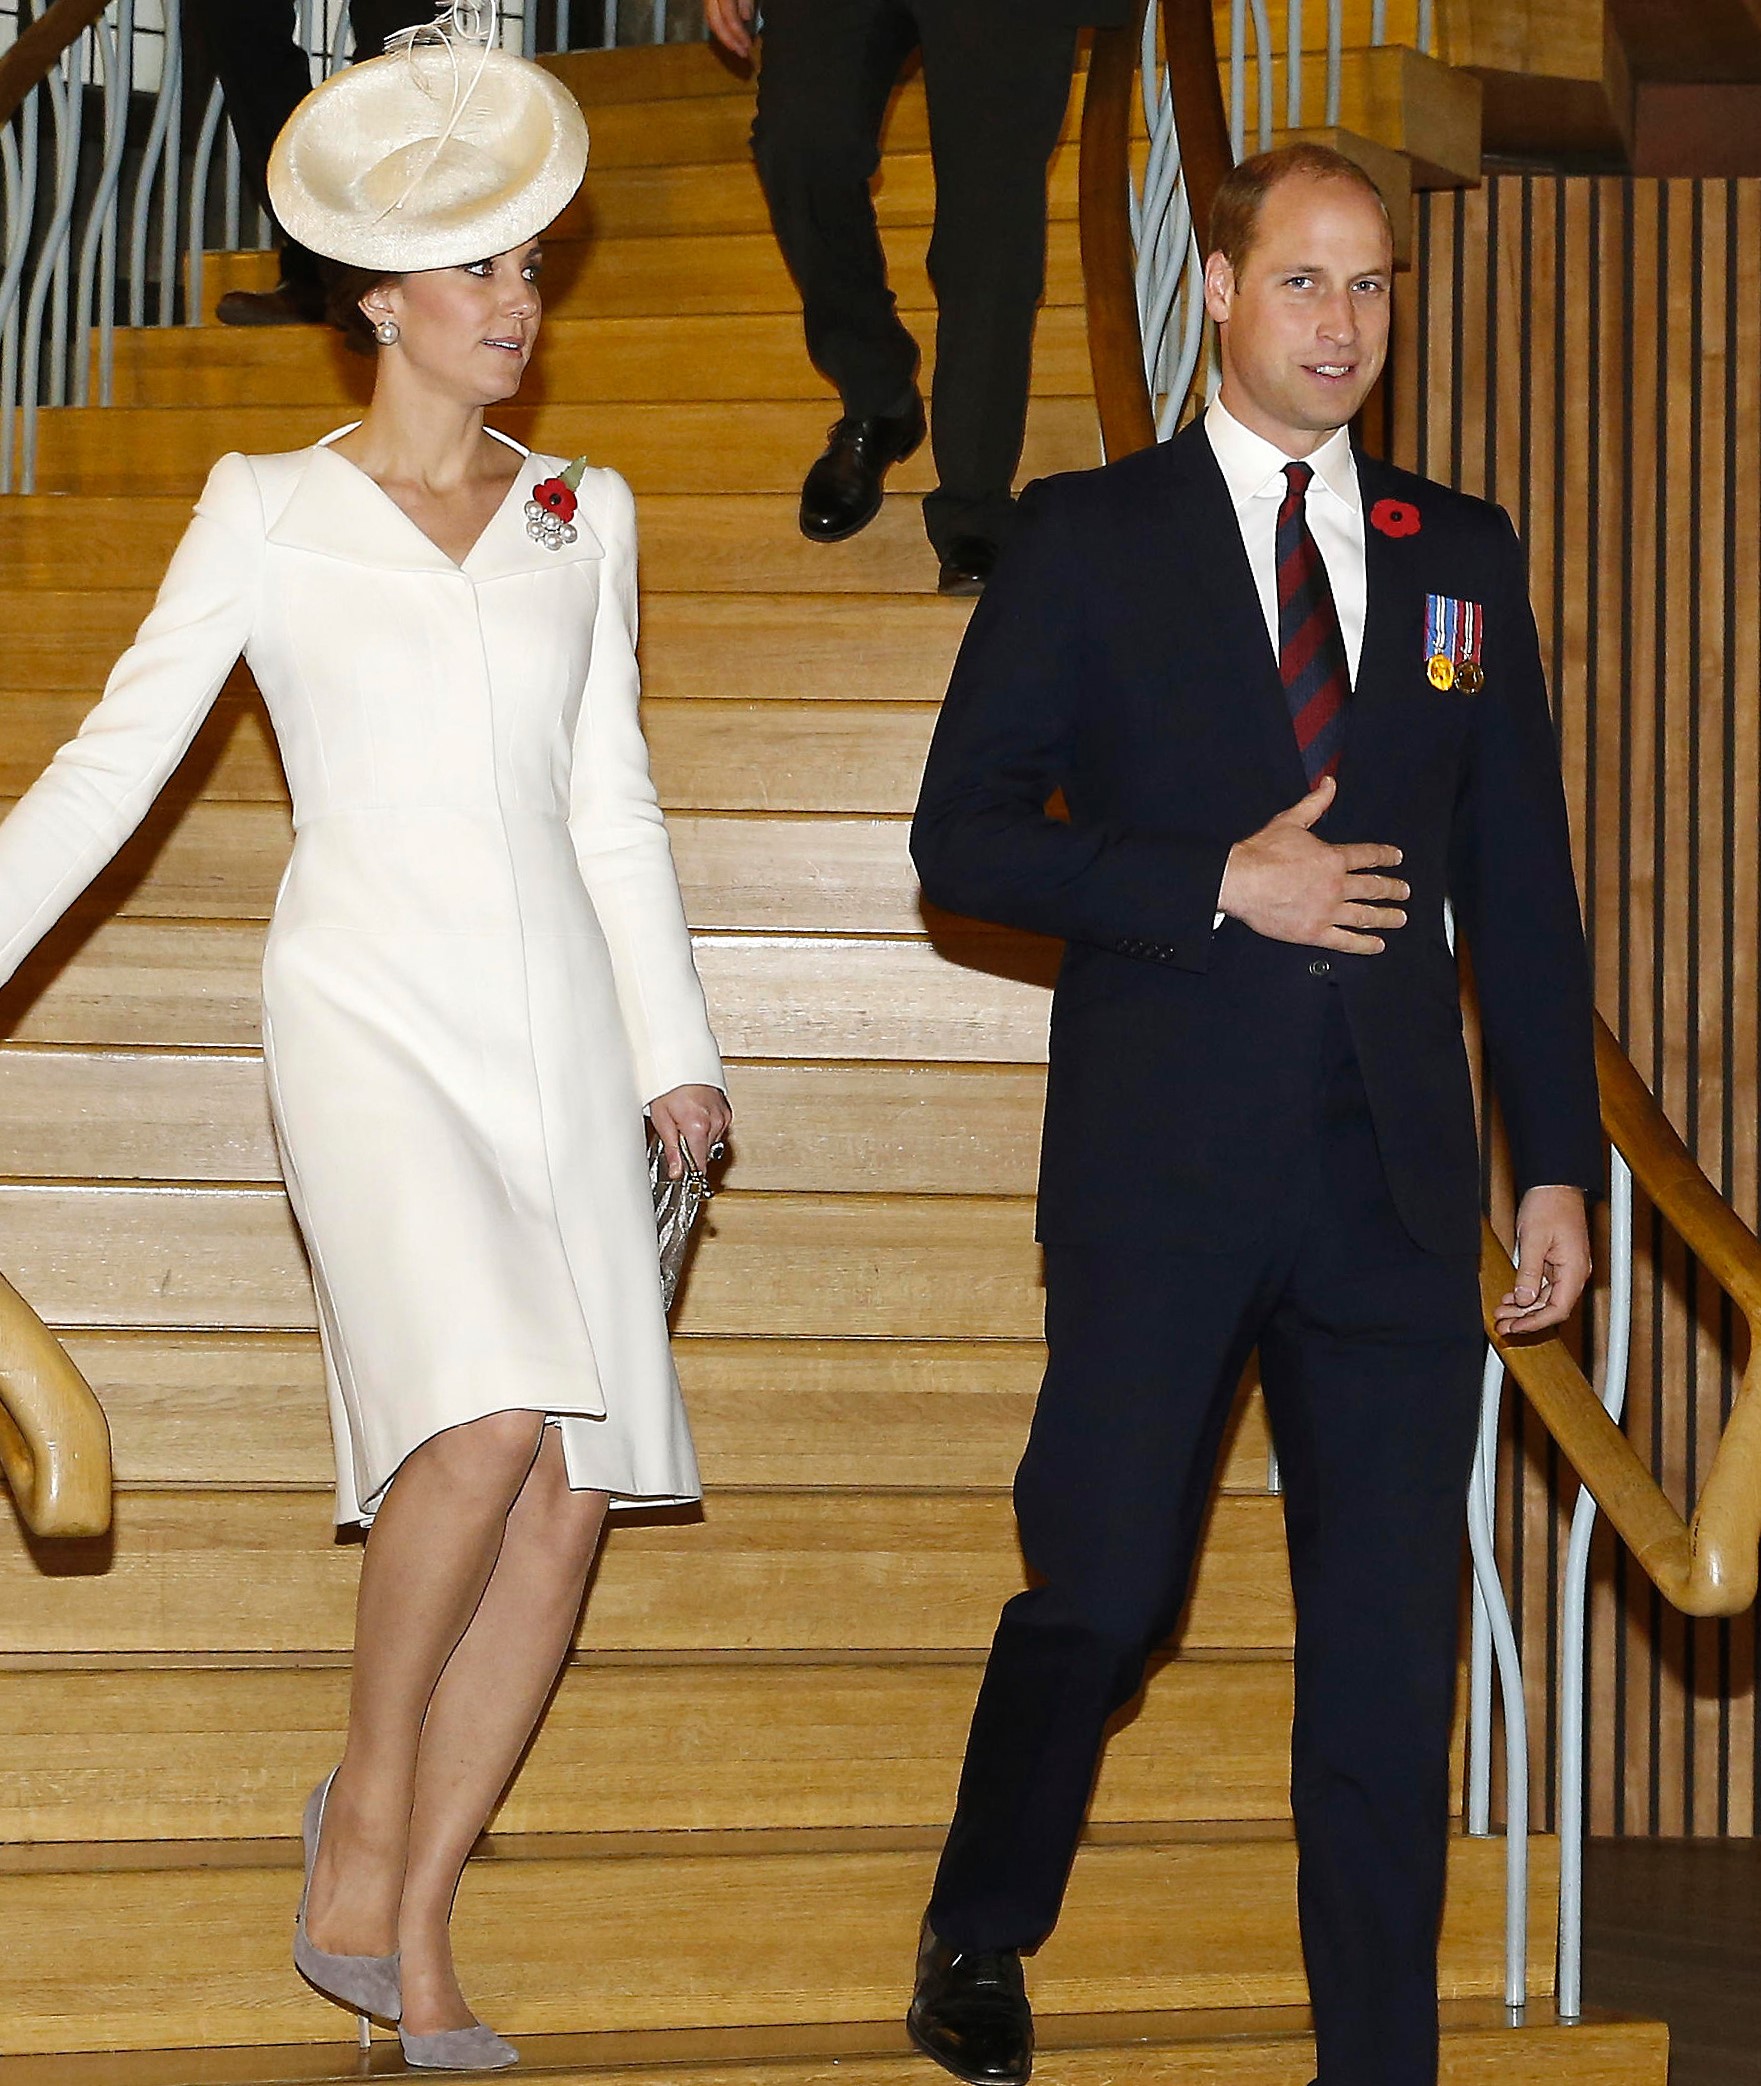 Prince William and Kate Middleton walking side by side down flight of stairs at event in 2017